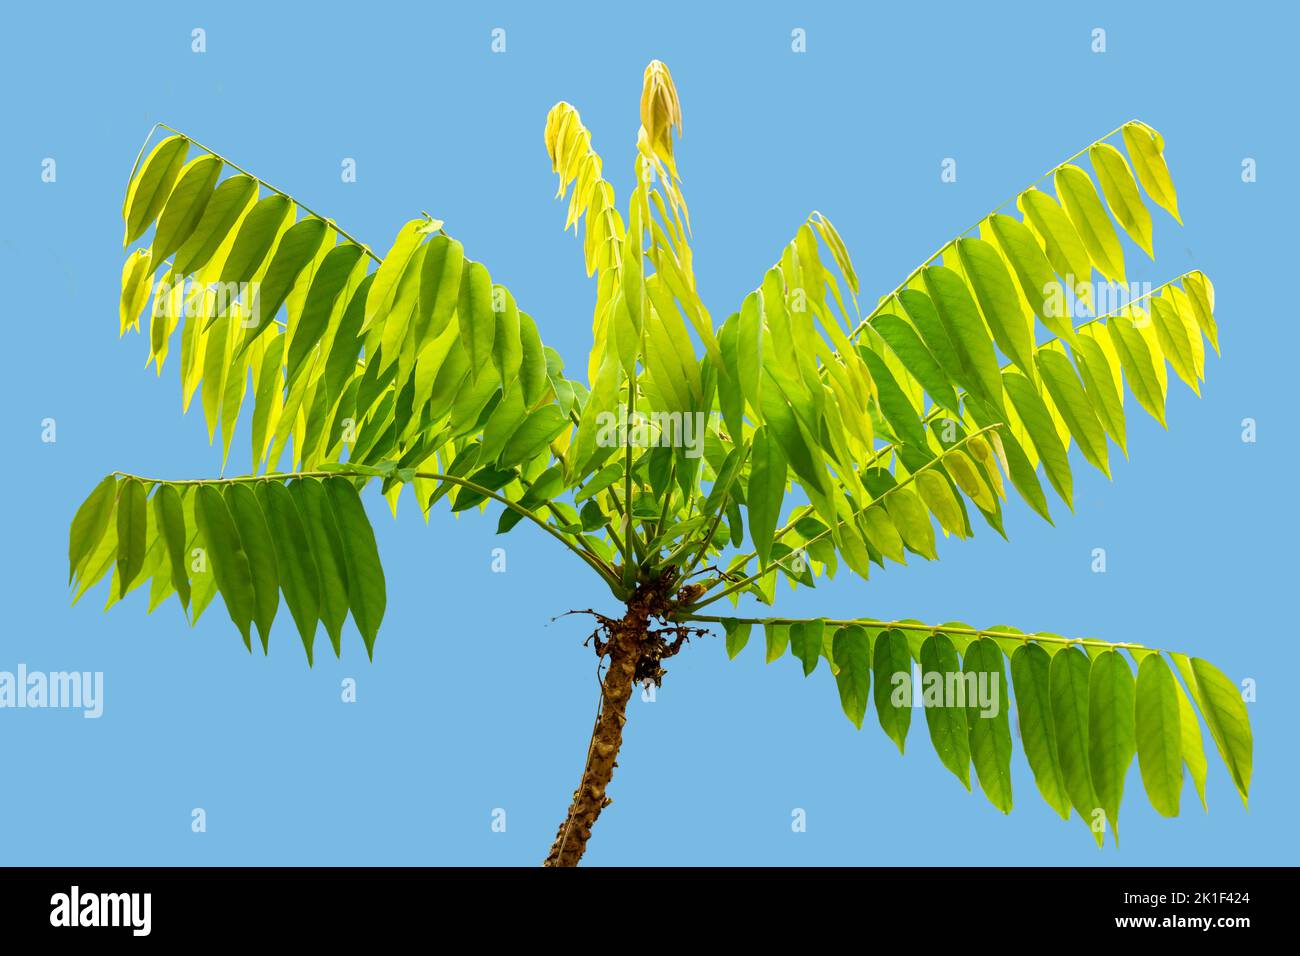 Averrhoa bilimbi tree branch complete with fresh green leaf stalks and shoots, isolated on a blue background Stock Photo